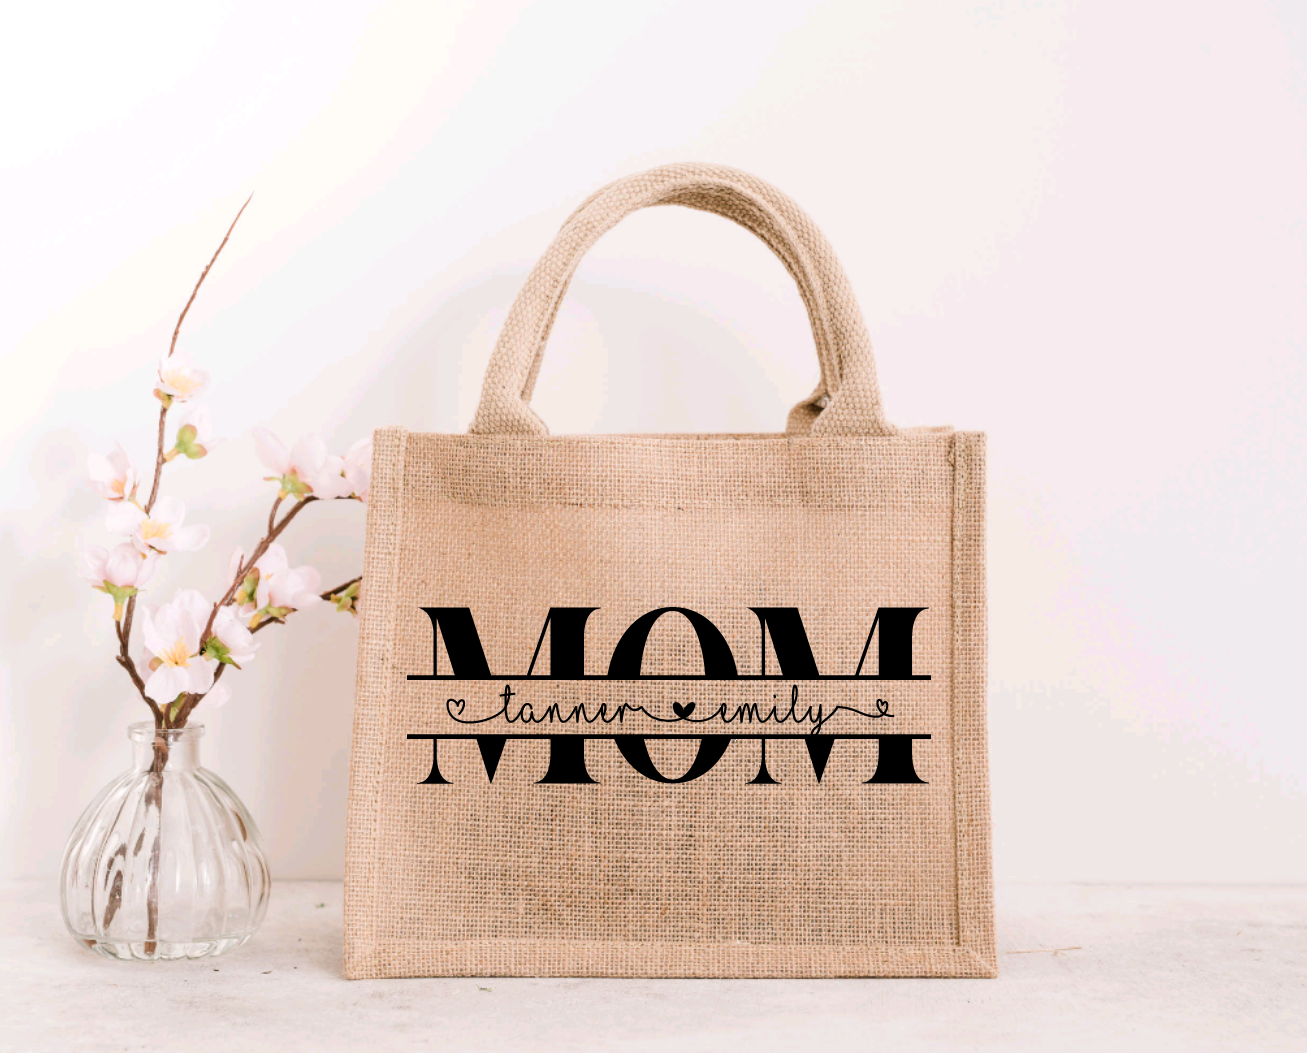 Personalized Canvas Tote Bag with Name, Graduation gift, beach bag